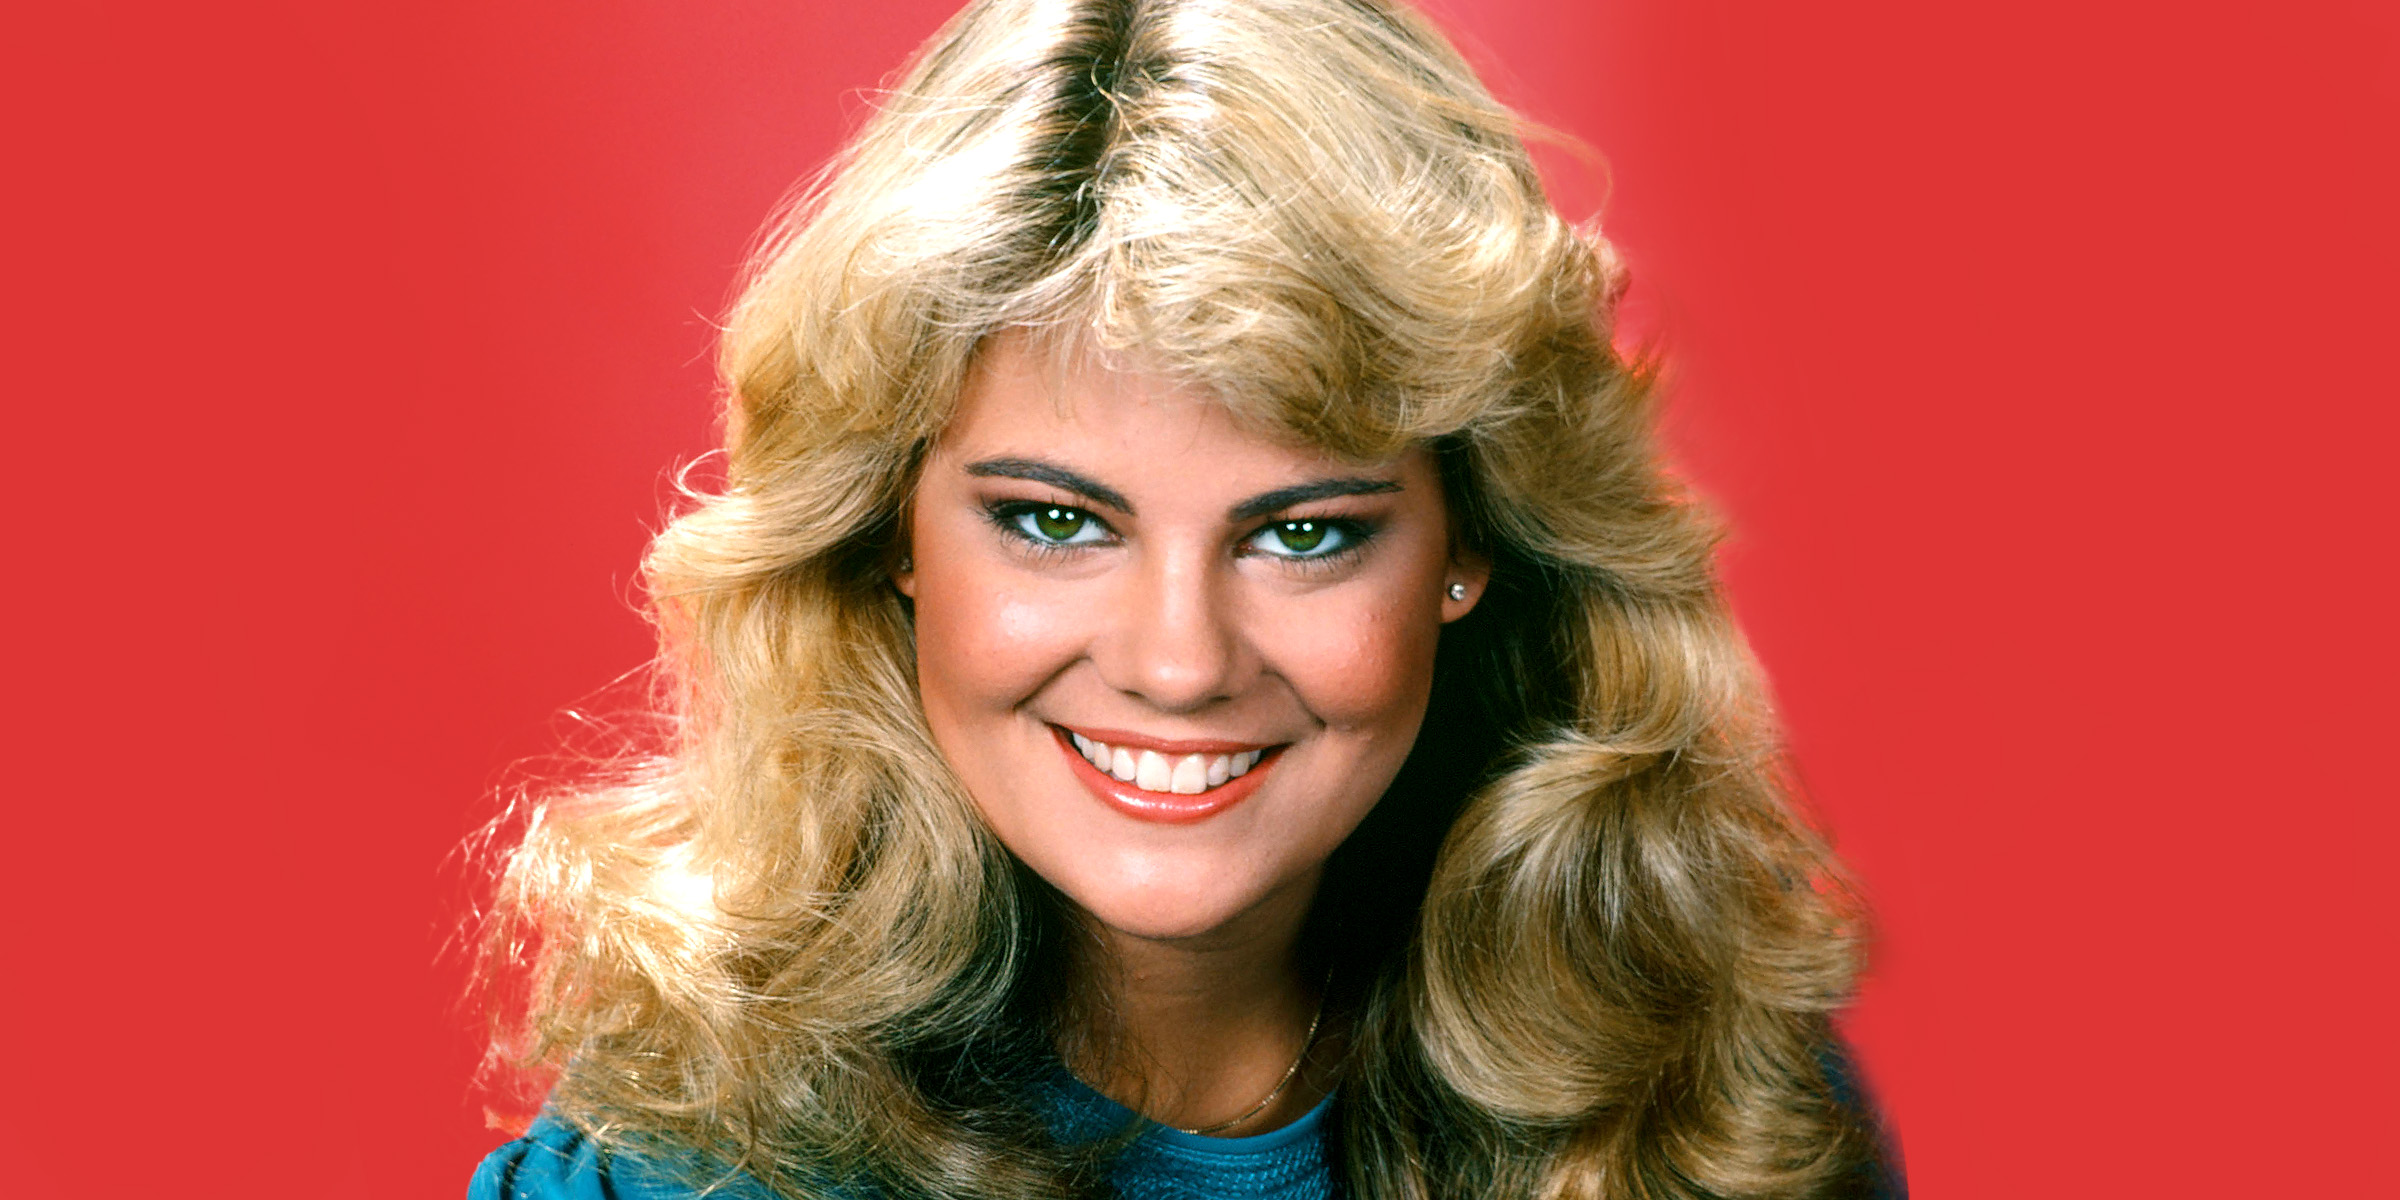 Lisa Whelchel | Source : Getty Images